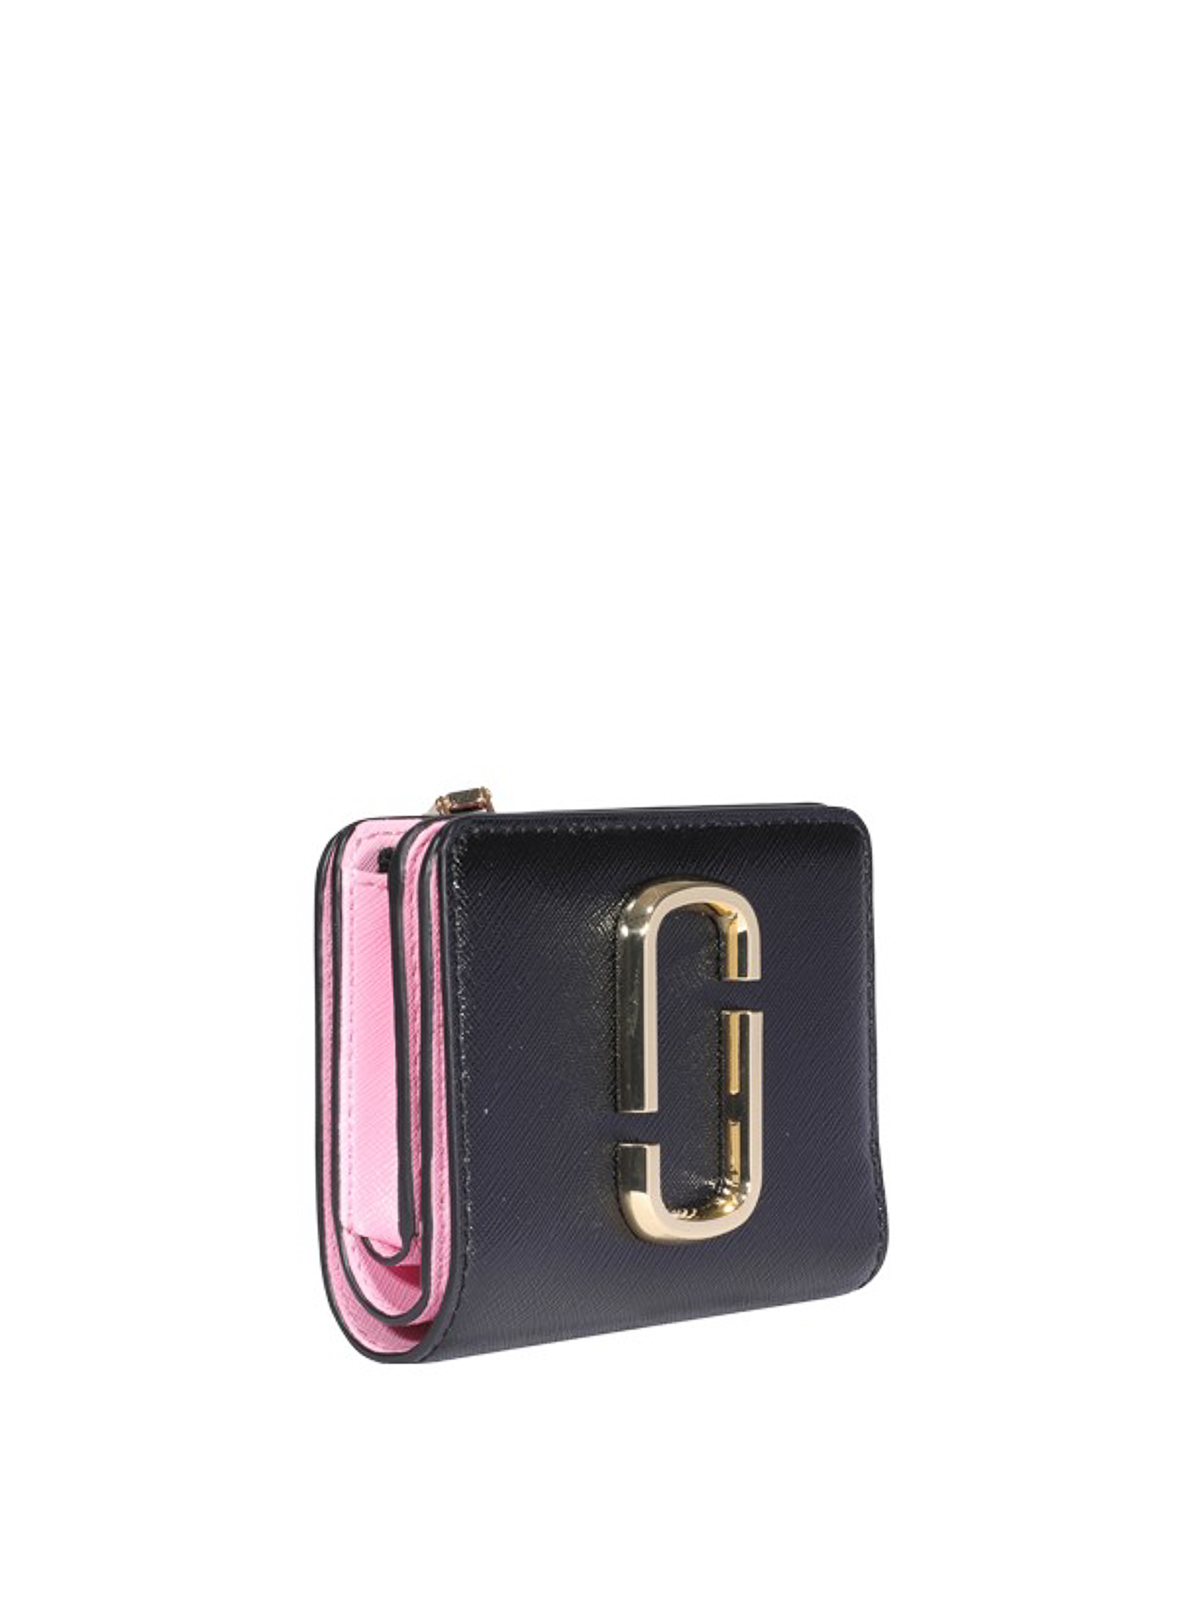 Marc jacobs snapshot compact wallet + FREE SHIPPING